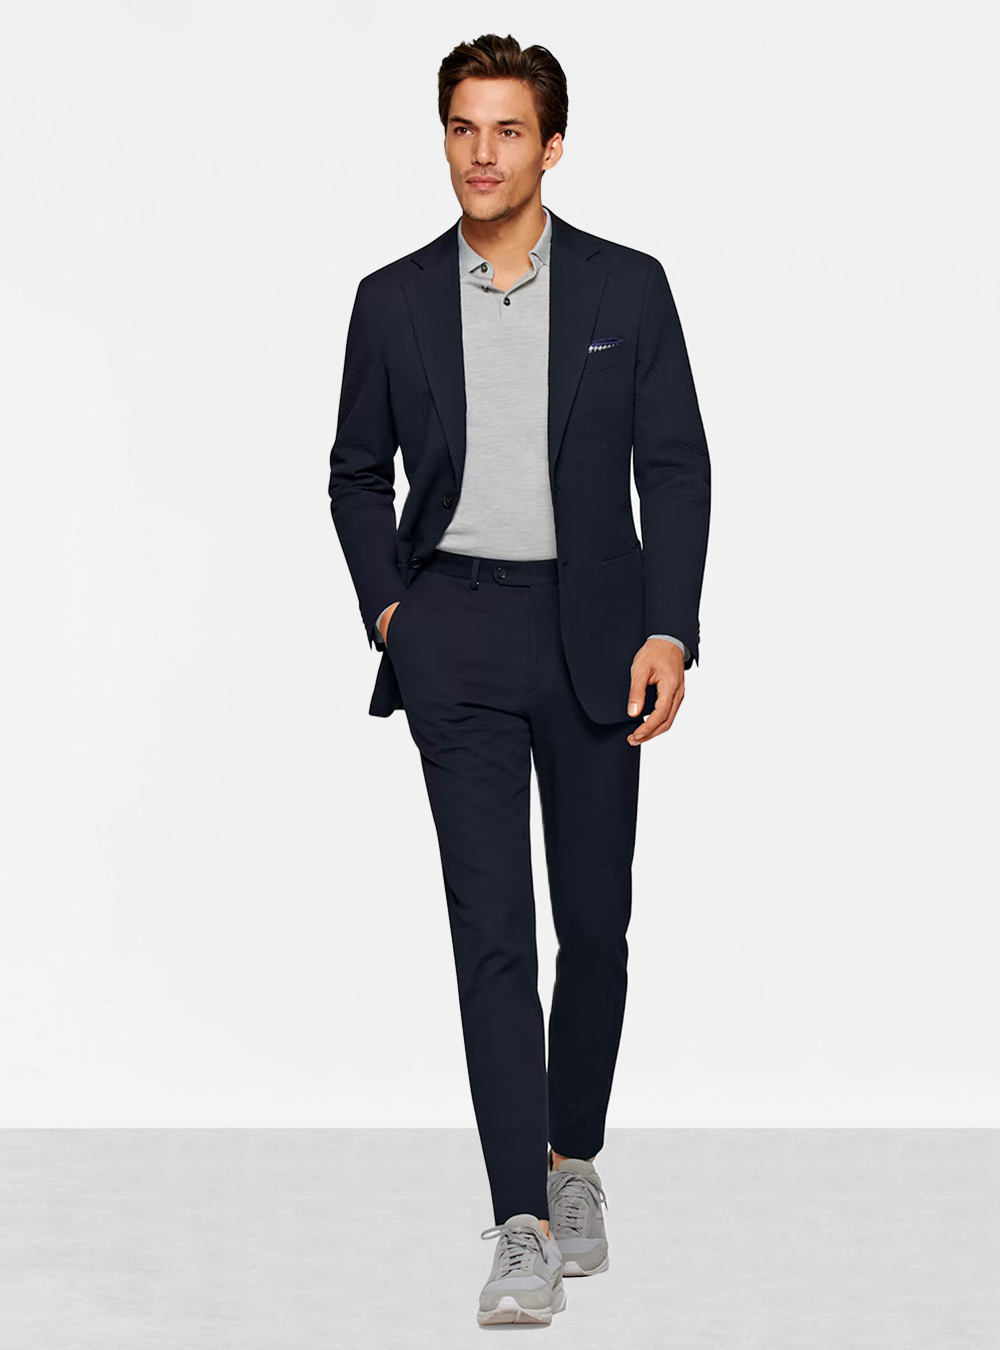 navy suit, grey polo shirt, and light grey sneakers